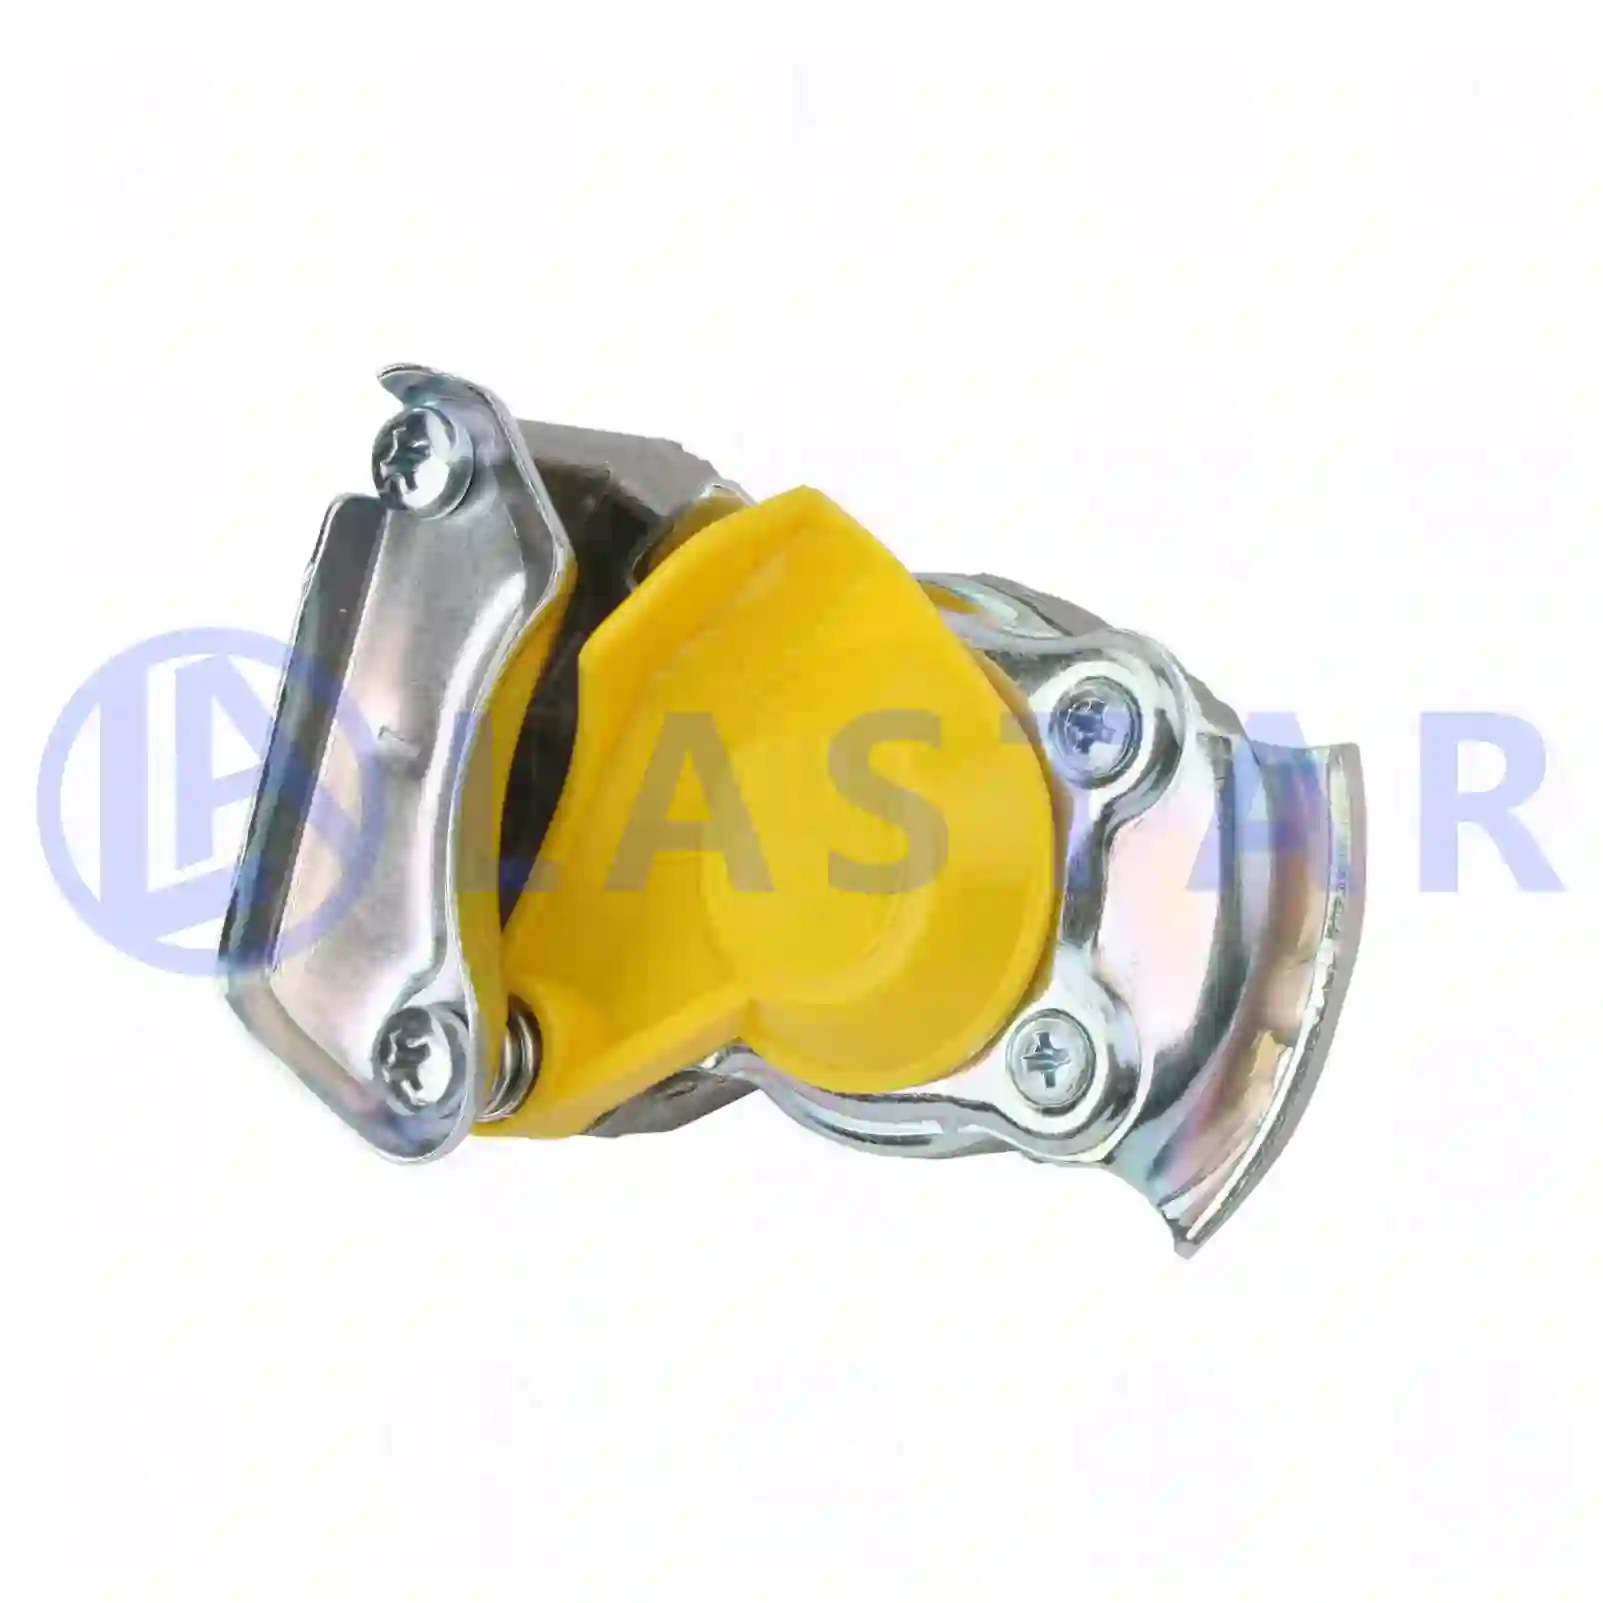 Palm coupling, yellow lid, 77714418, 605205100, 0218240400, 0031200, 1506436, 1642263, 31200, 868141, 868142, ACU8710, 02379560, 02516345, 02516835, 02516904, 02521365, 41035633, 41035634, 5006210386, 60135772, 61259650, 61259651, A2342200, CF3505858, 150880, 02379560, 02516345, 02516835, 02516904, 02521365, 2379560, 2516345, 2516835, 2516904, 2521365, 41035634, 61259651, 182796, 500945000, 945000, 502966708, 502966777, 502998301, 81512206038, 81512206040, 81512206043, 81512206067, 81512206071, 81512206076, 81512206127, 0004293830, 0004295130, 0004295430, 0004295930, 0004297930, 0004299530, F001009, 0037534500, 5000608012, 5021170410, 4425012200, 1112486, 1912280, 20167486, 330302, 051425, 8285192000, 1568341, ZG50553-0008 ||  77714418 Lastar Spare Part | Truck Spare Parts, Auotomotive Spare Parts Palm coupling, yellow lid, 77714418, 605205100, 0218240400, 0031200, 1506436, 1642263, 31200, 868141, 868142, ACU8710, 02379560, 02516345, 02516835, 02516904, 02521365, 41035633, 41035634, 5006210386, 60135772, 61259650, 61259651, A2342200, CF3505858, 150880, 02379560, 02516345, 02516835, 02516904, 02521365, 2379560, 2516345, 2516835, 2516904, 2521365, 41035634, 61259651, 182796, 500945000, 945000, 502966708, 502966777, 502998301, 81512206038, 81512206040, 81512206043, 81512206067, 81512206071, 81512206076, 81512206127, 0004293830, 0004295130, 0004295430, 0004295930, 0004297930, 0004299530, F001009, 0037534500, 5000608012, 5021170410, 4425012200, 1112486, 1912280, 20167486, 330302, 051425, 8285192000, 1568341, ZG50553-0008 ||  77714418 Lastar Spare Part | Truck Spare Parts, Auotomotive Spare Parts